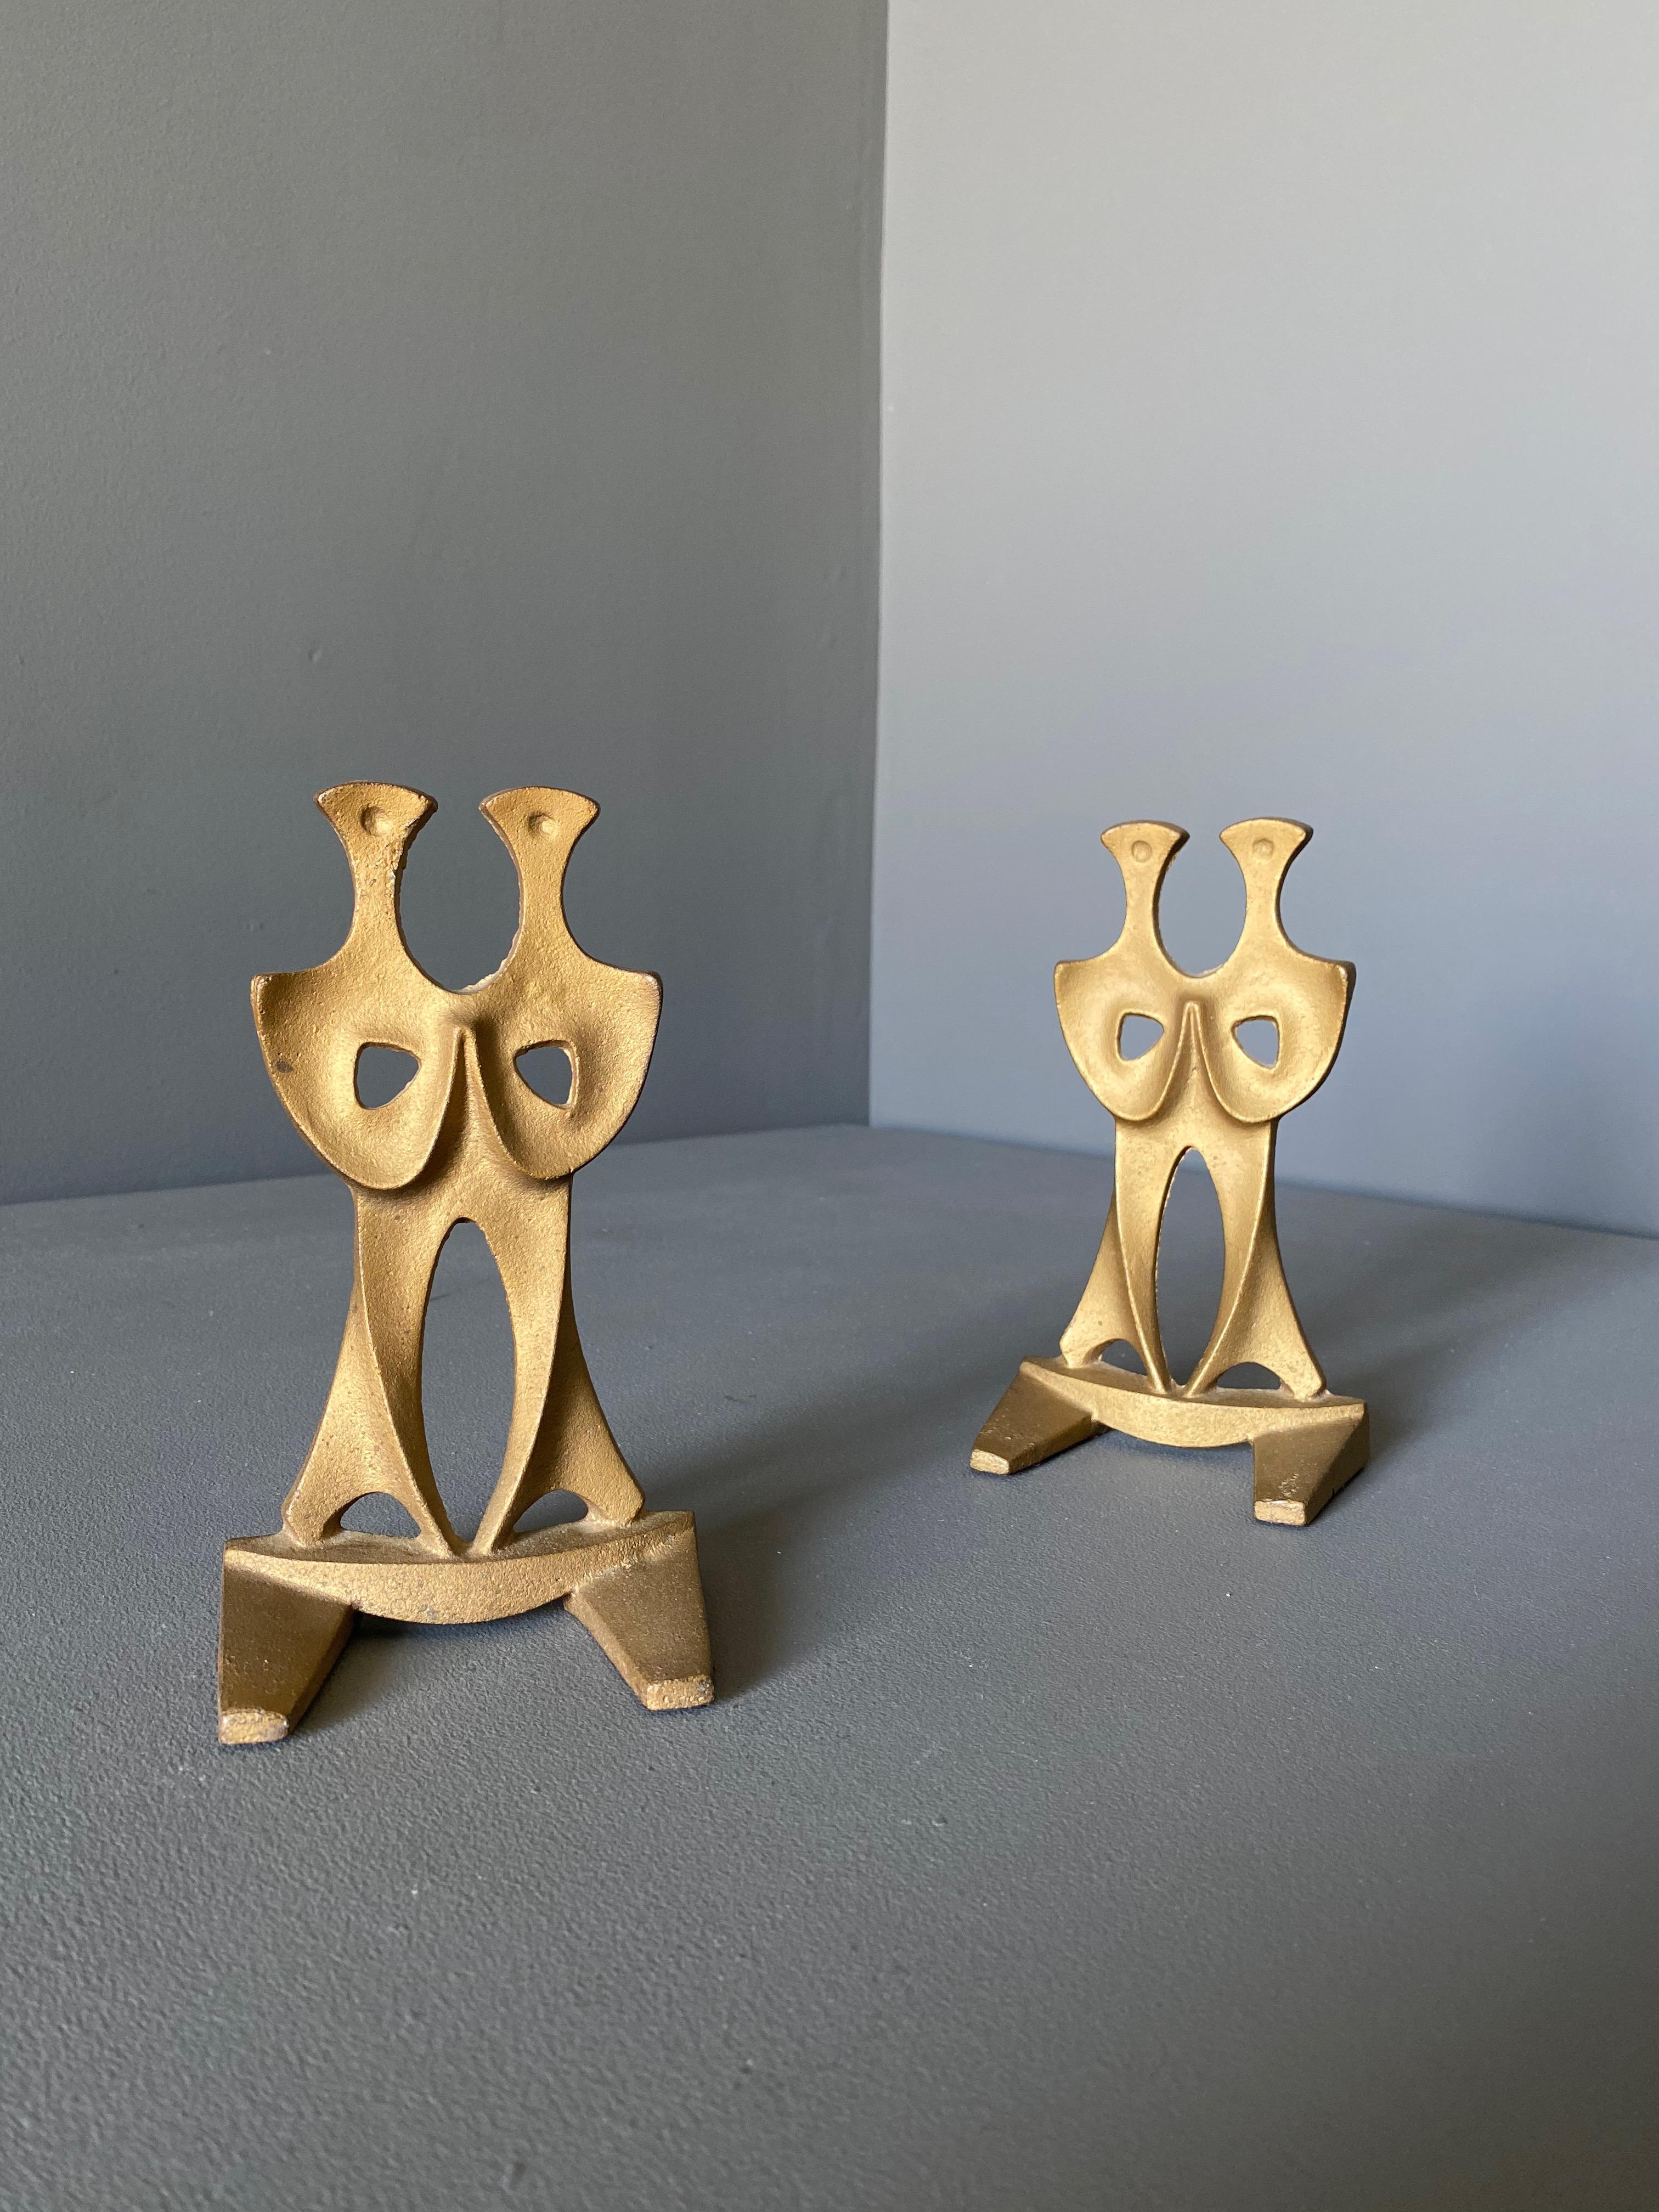 Sculptural cast iron bookends in the manner of Frederick Weinberg, circa 1955.